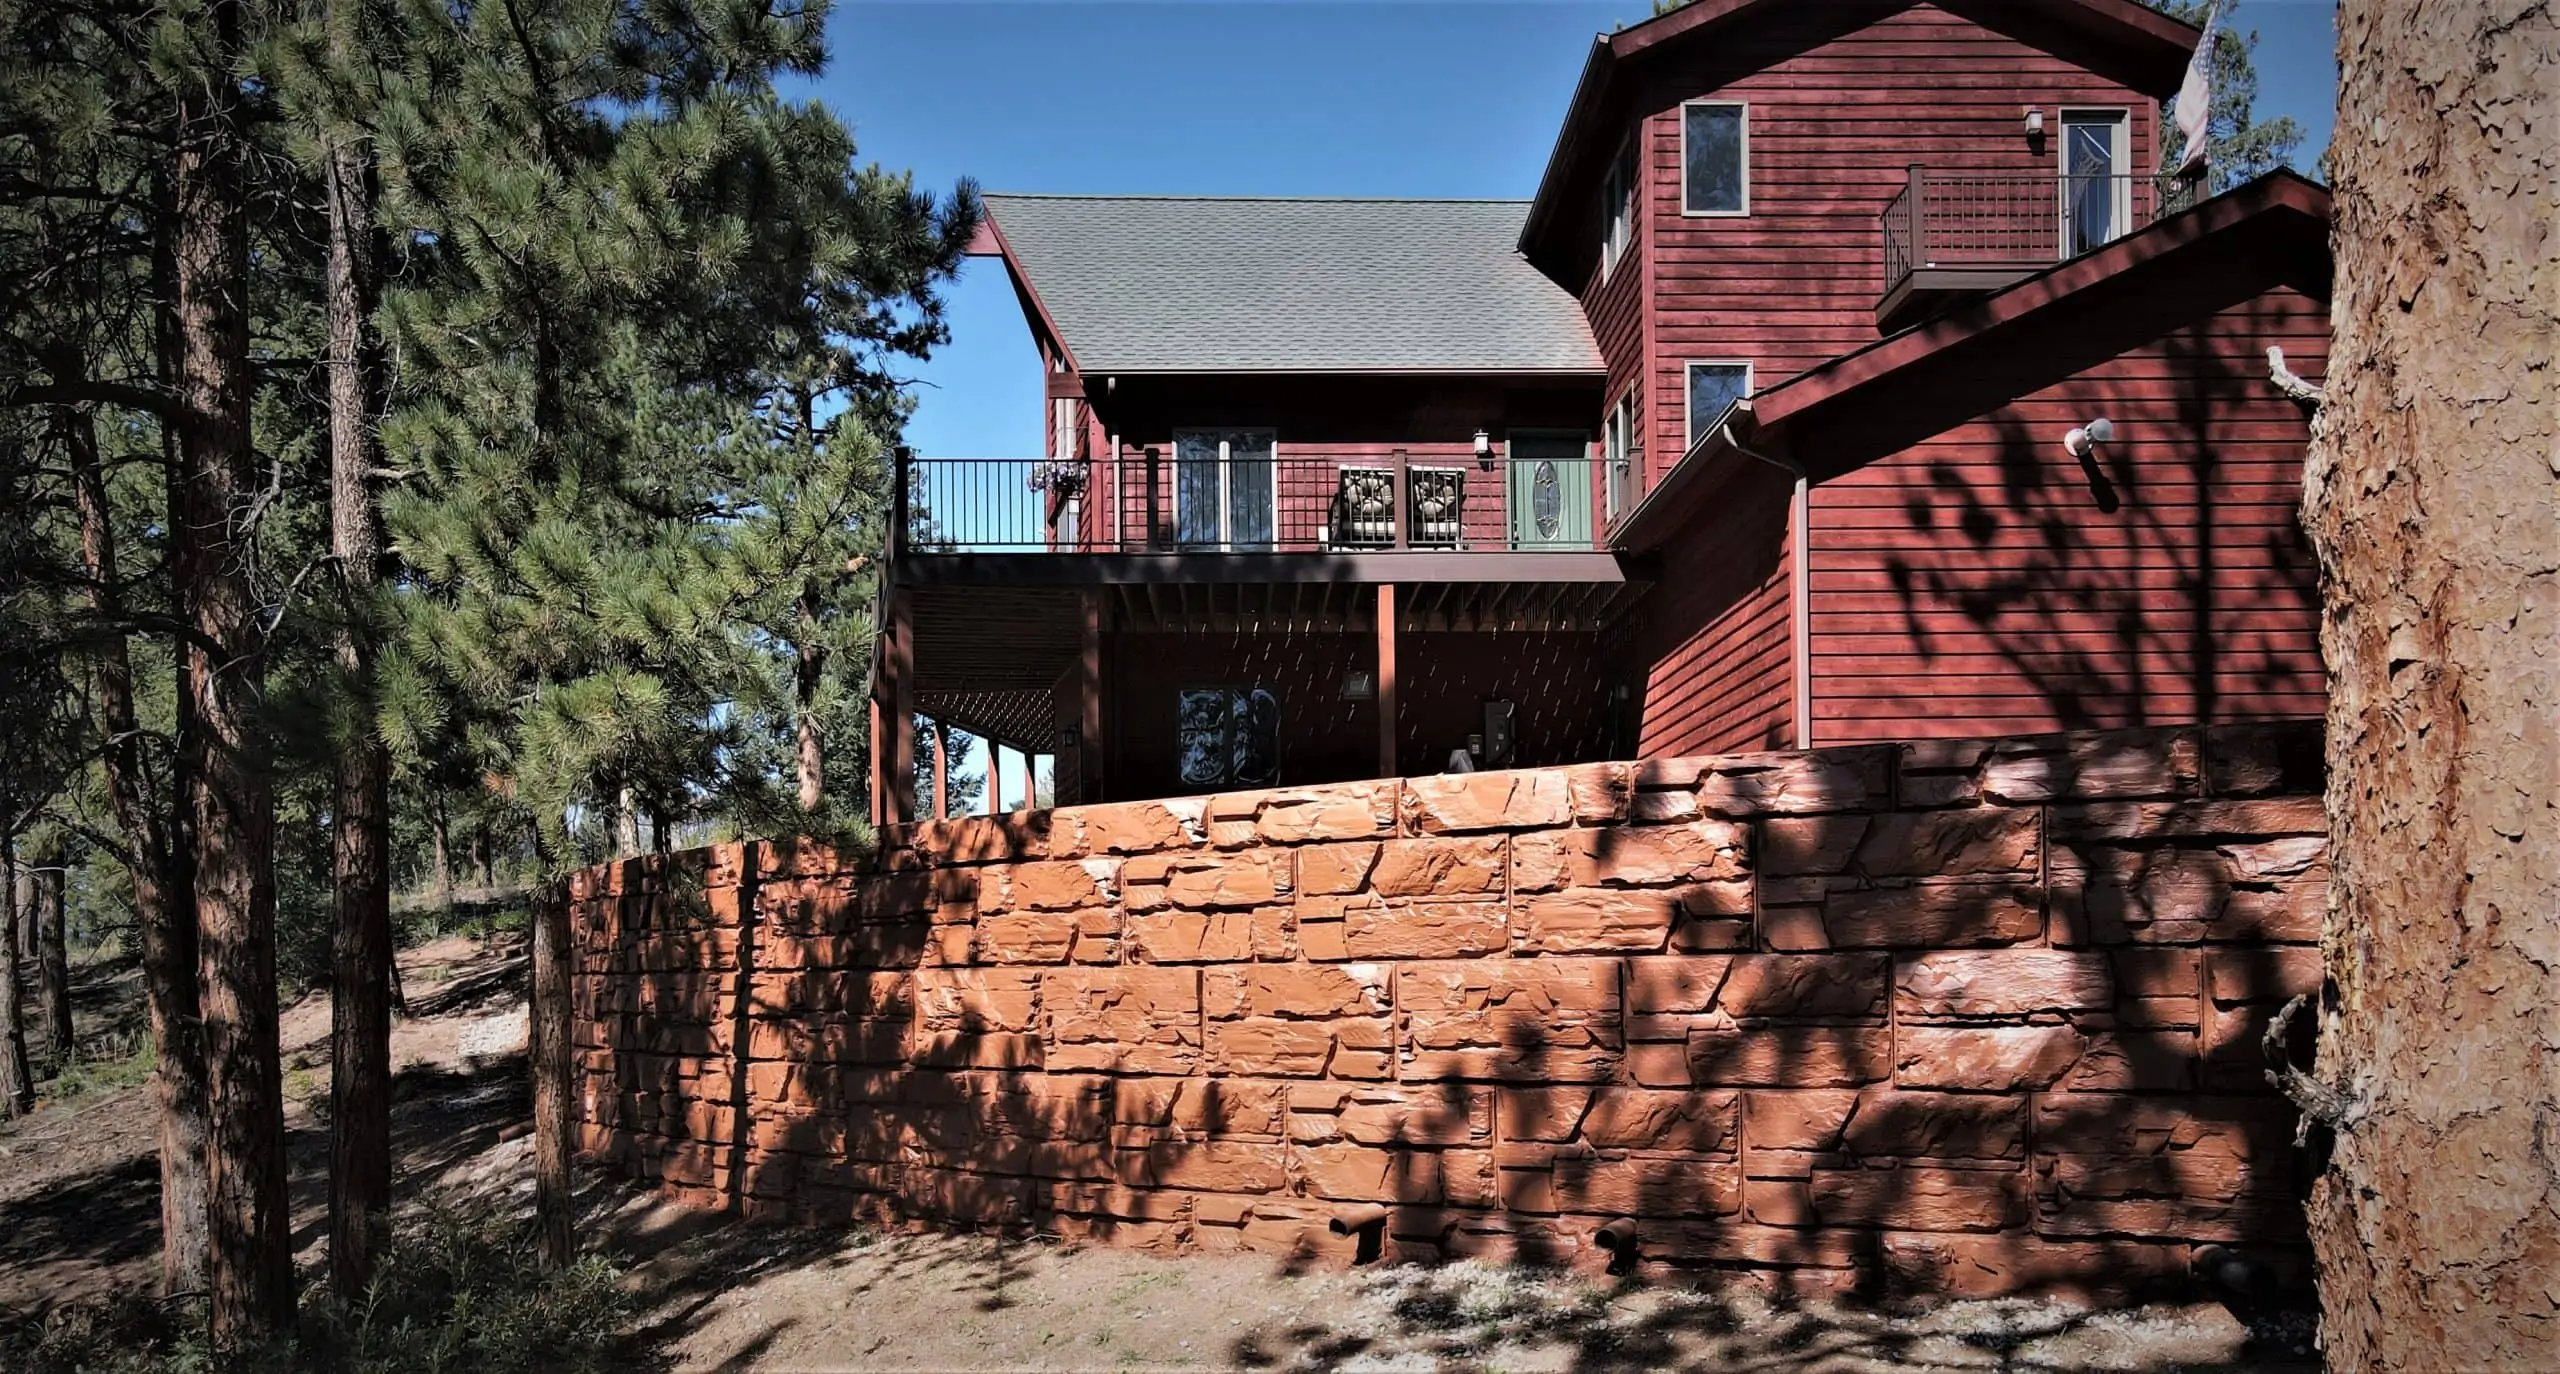 Stained MagnumStone retaining wall extends yard in Colorado, USA.